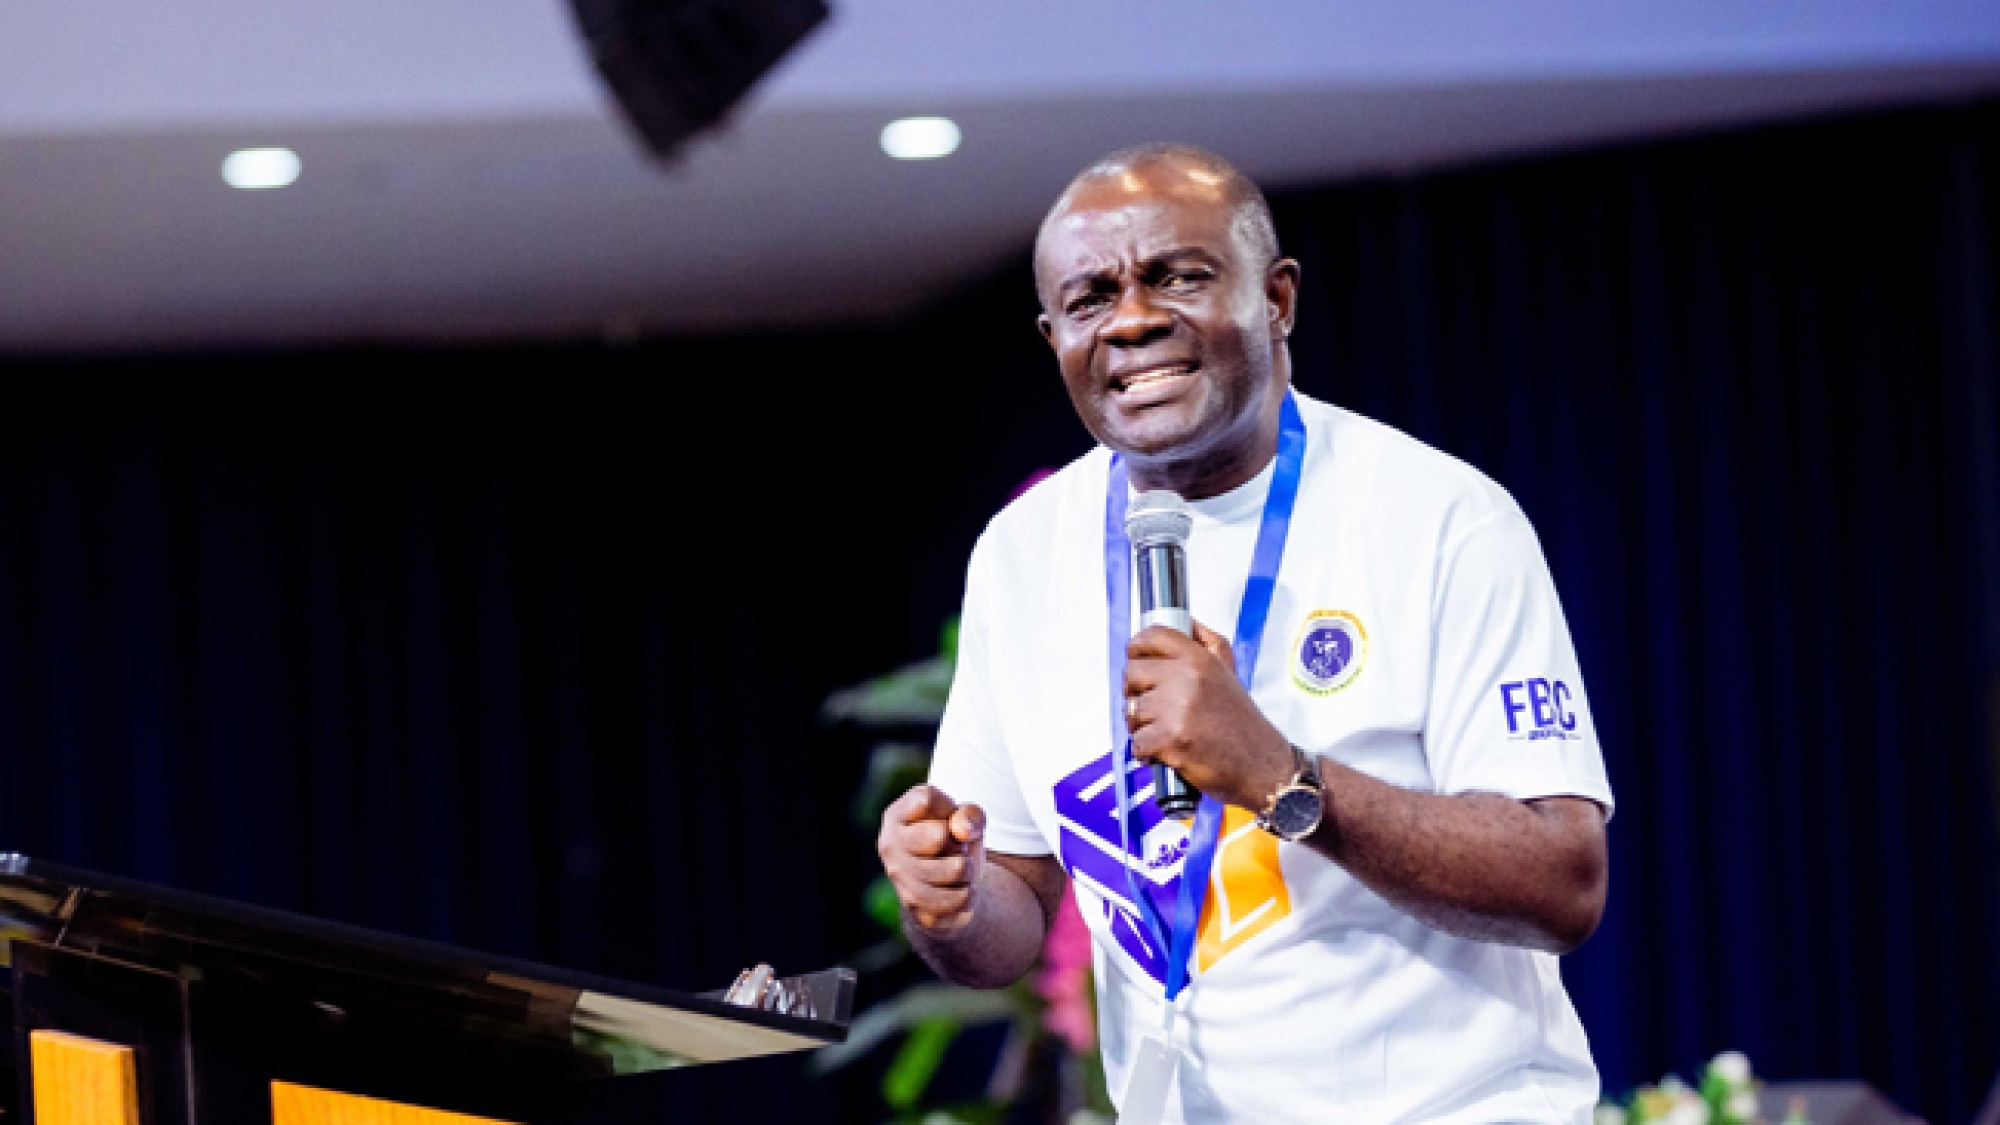 YOU CARRY TRANSFORMATIVE POWER – GENERAL SECRETARY TELLS CHILDREN WORKERS web